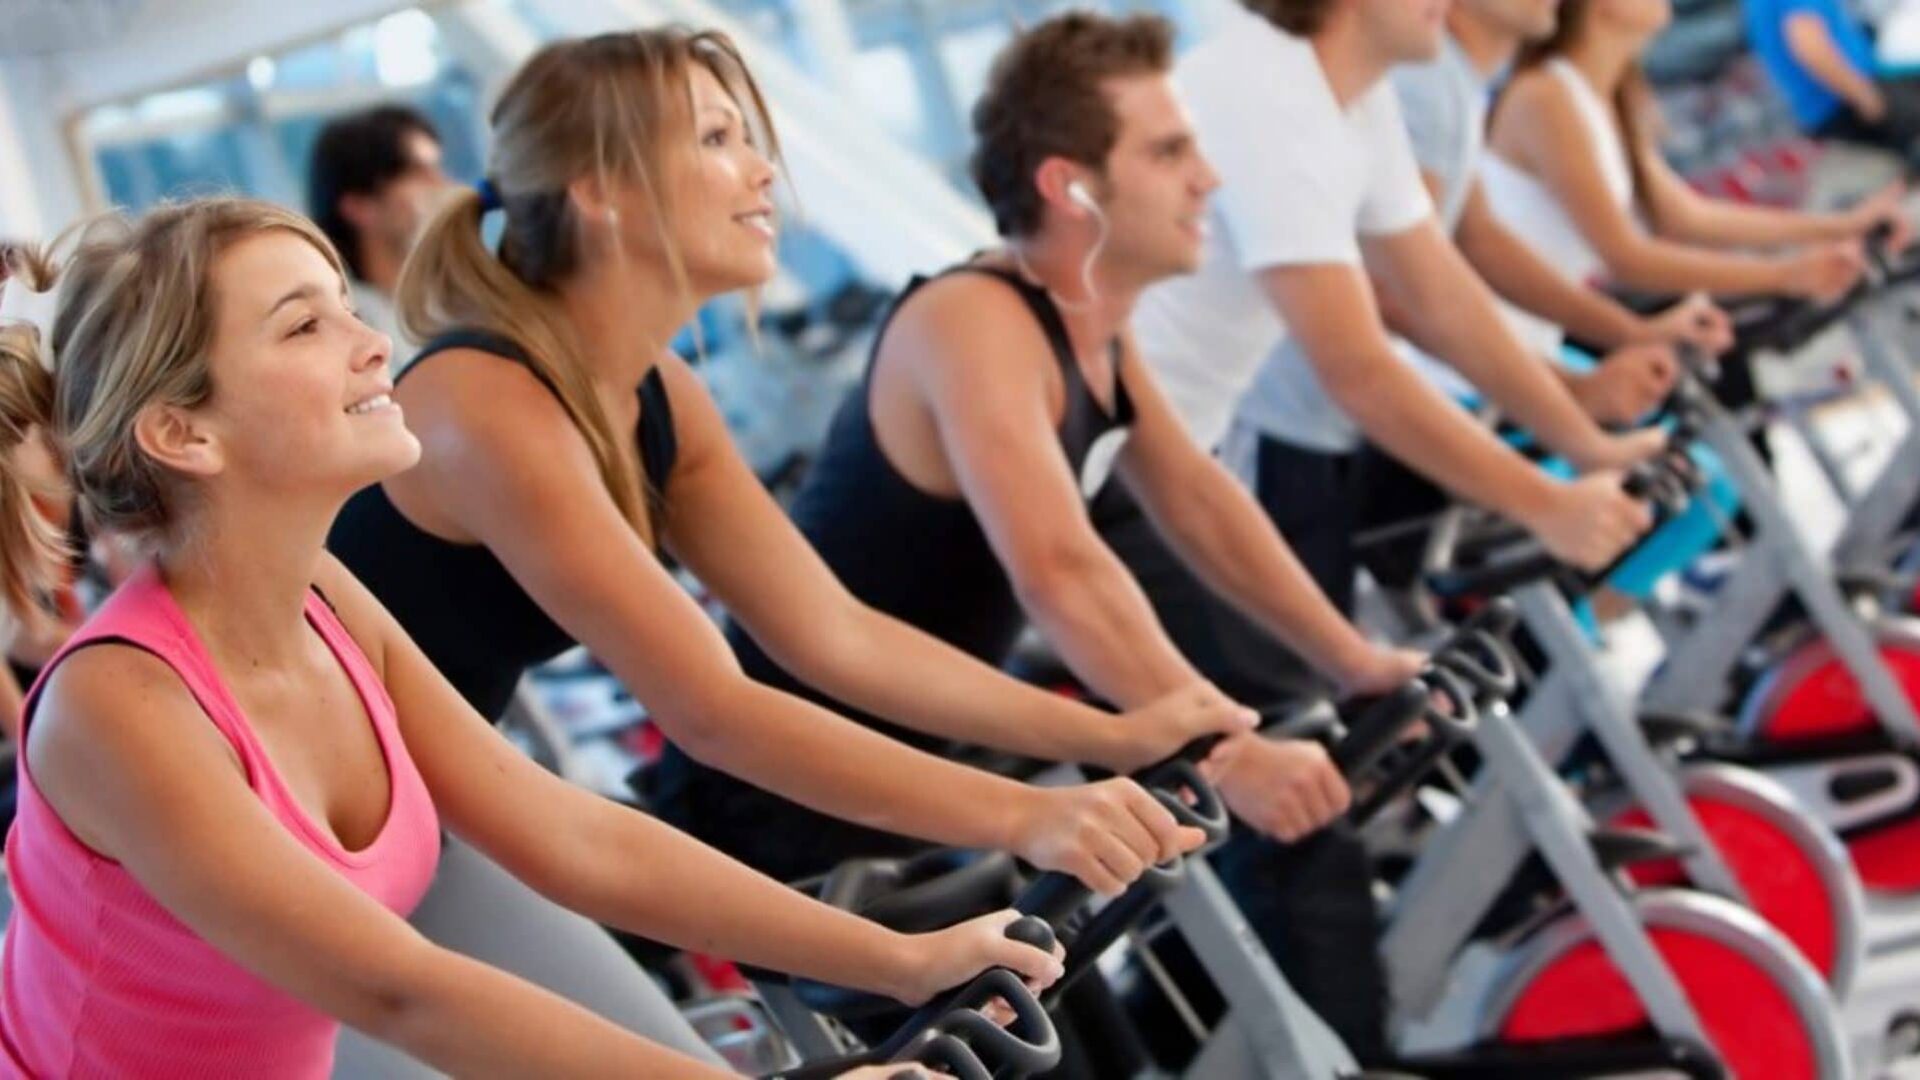 group of people riding indoor bikes in a spin class|five people on a row of treadmills at the gym